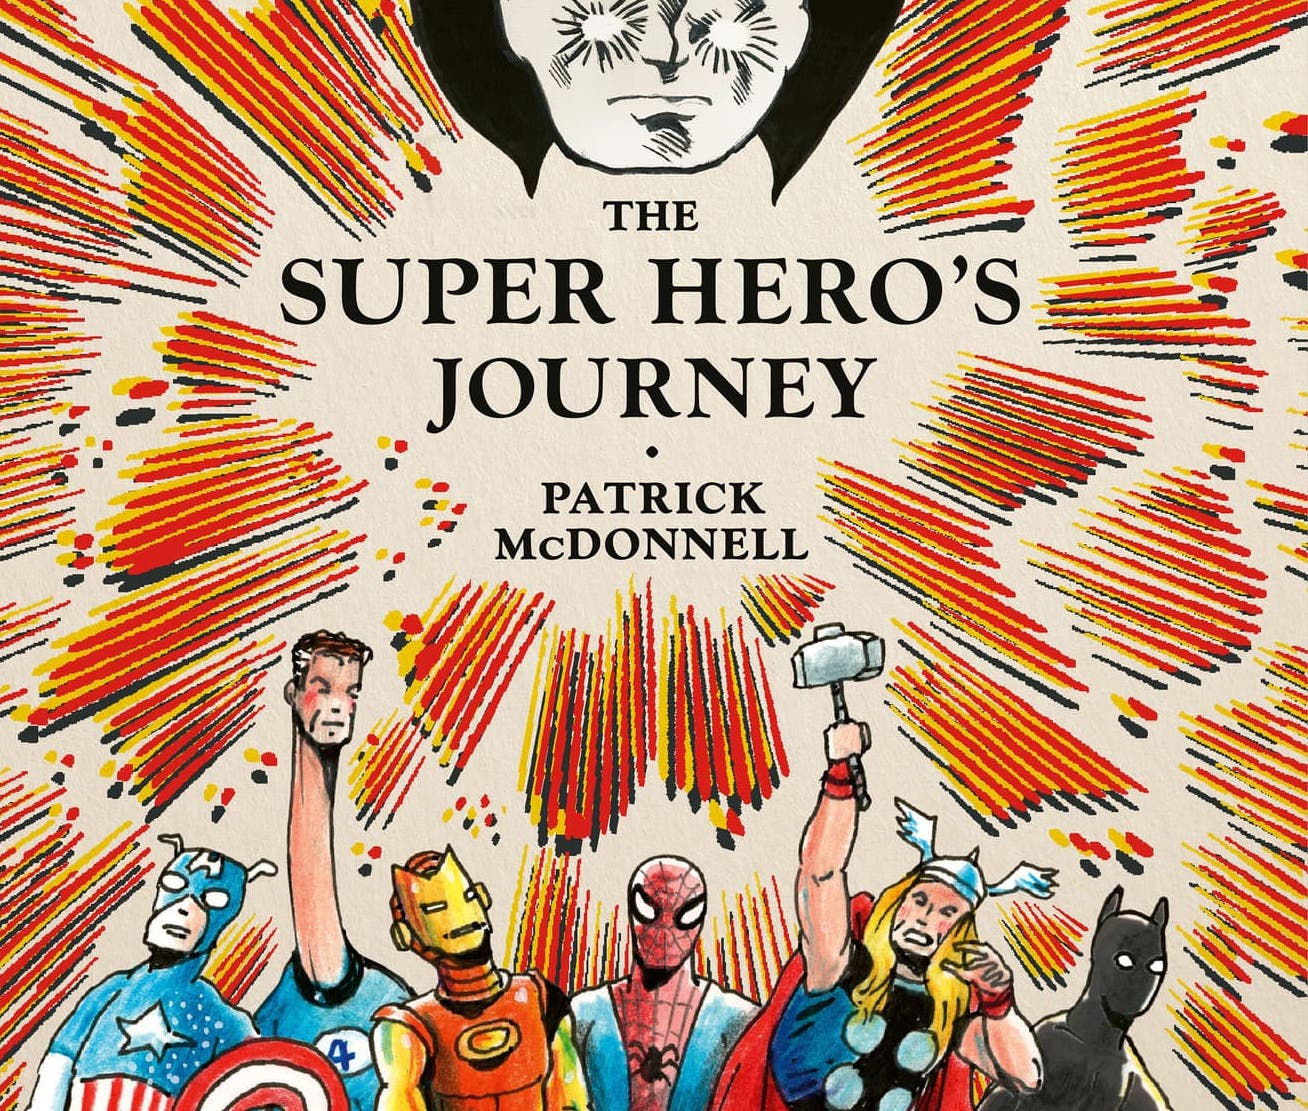 Abrams ComicArts and Marvel reveal new details for 'The Super Hero's Journey'